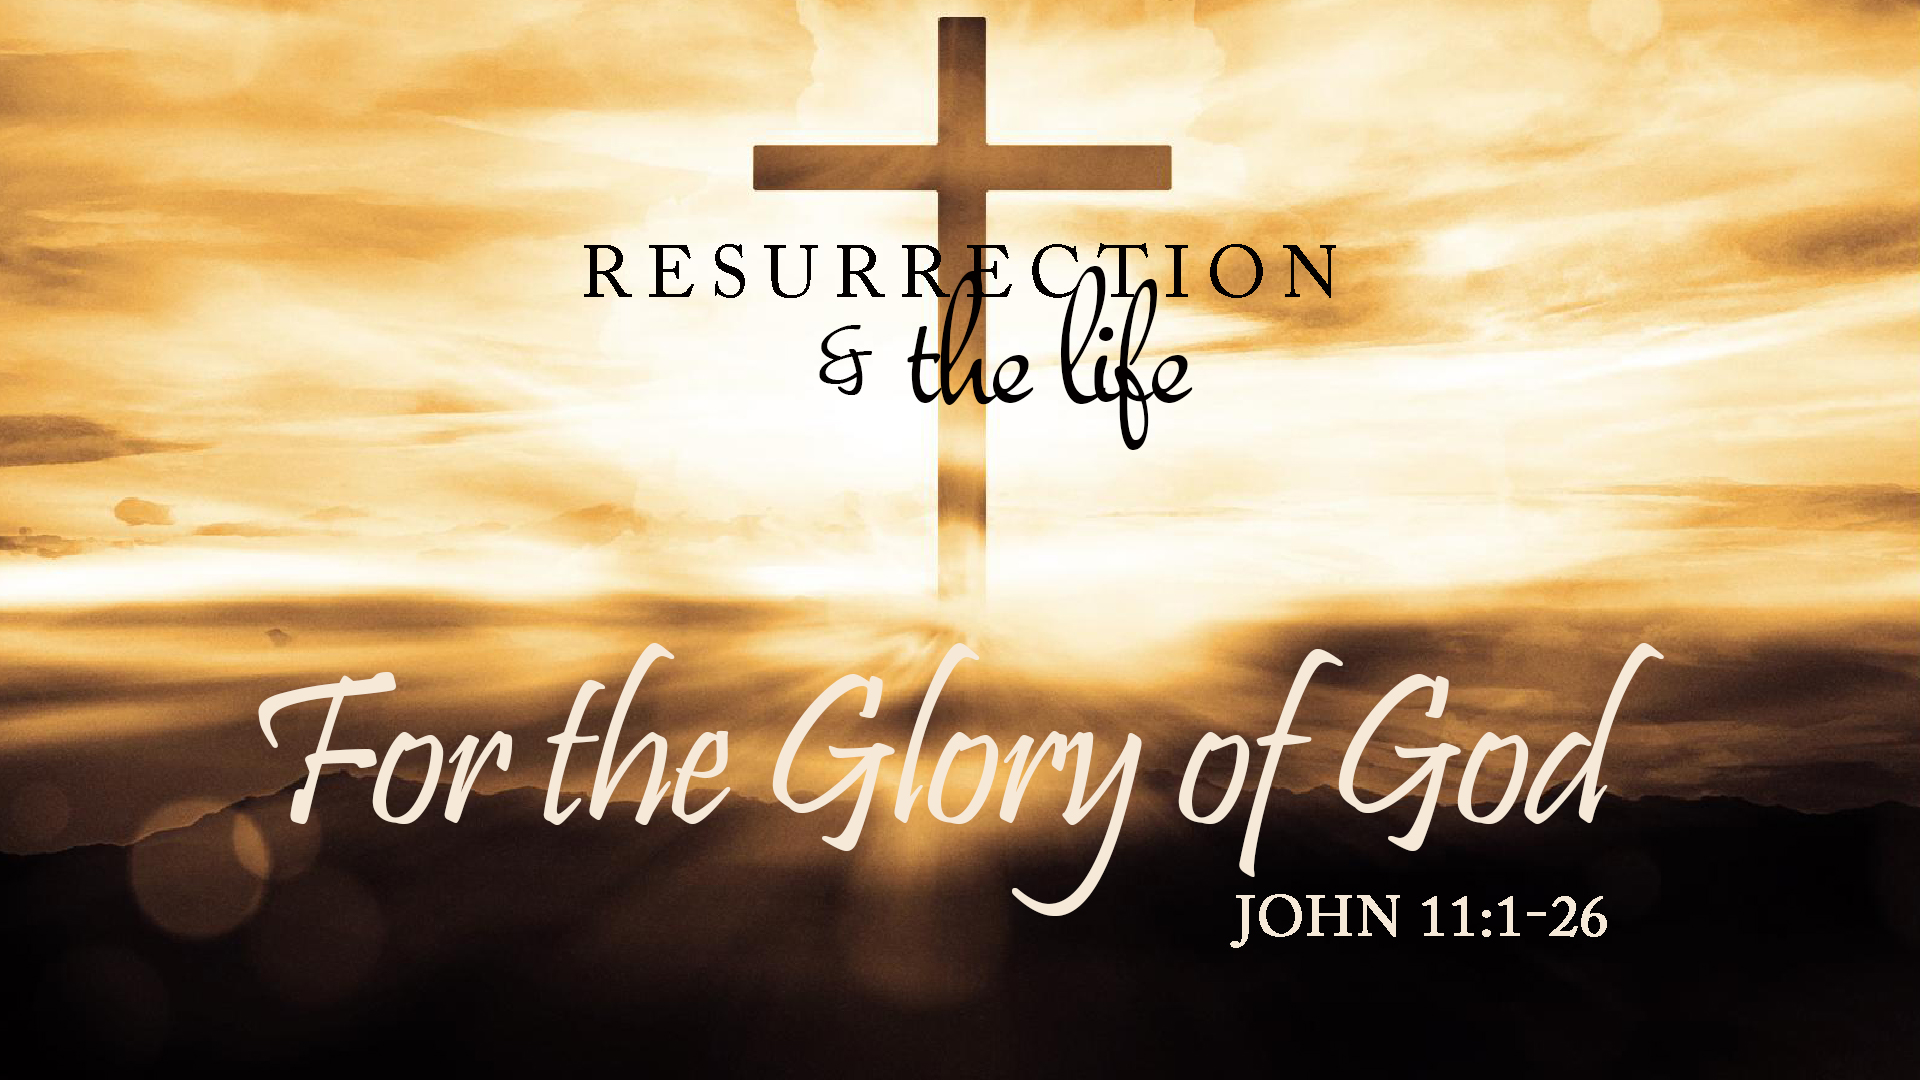  Resurrection & the Life, part 1: For the Glory of God  Image